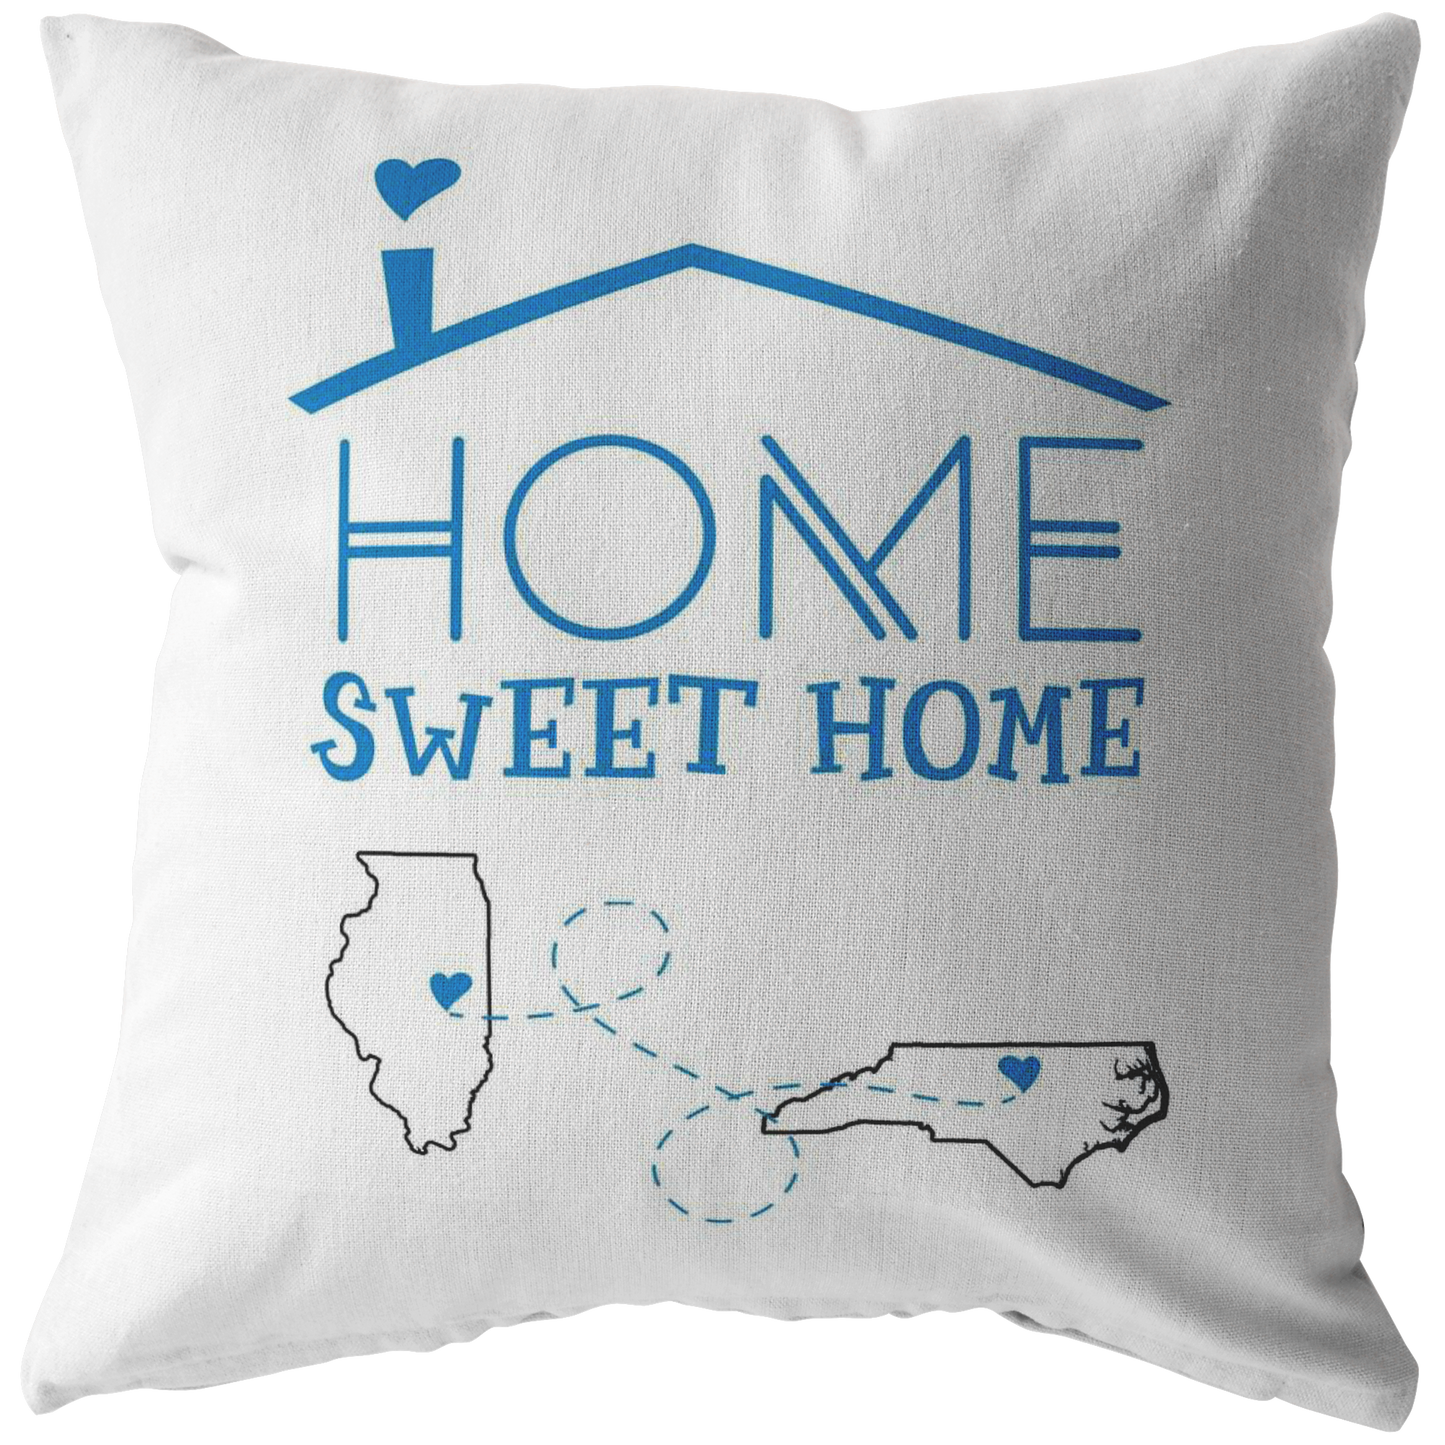 ND-pl20421675-sp-15547 - Map Throw Pillow Covers Illinois North Carolina - Home Sweet